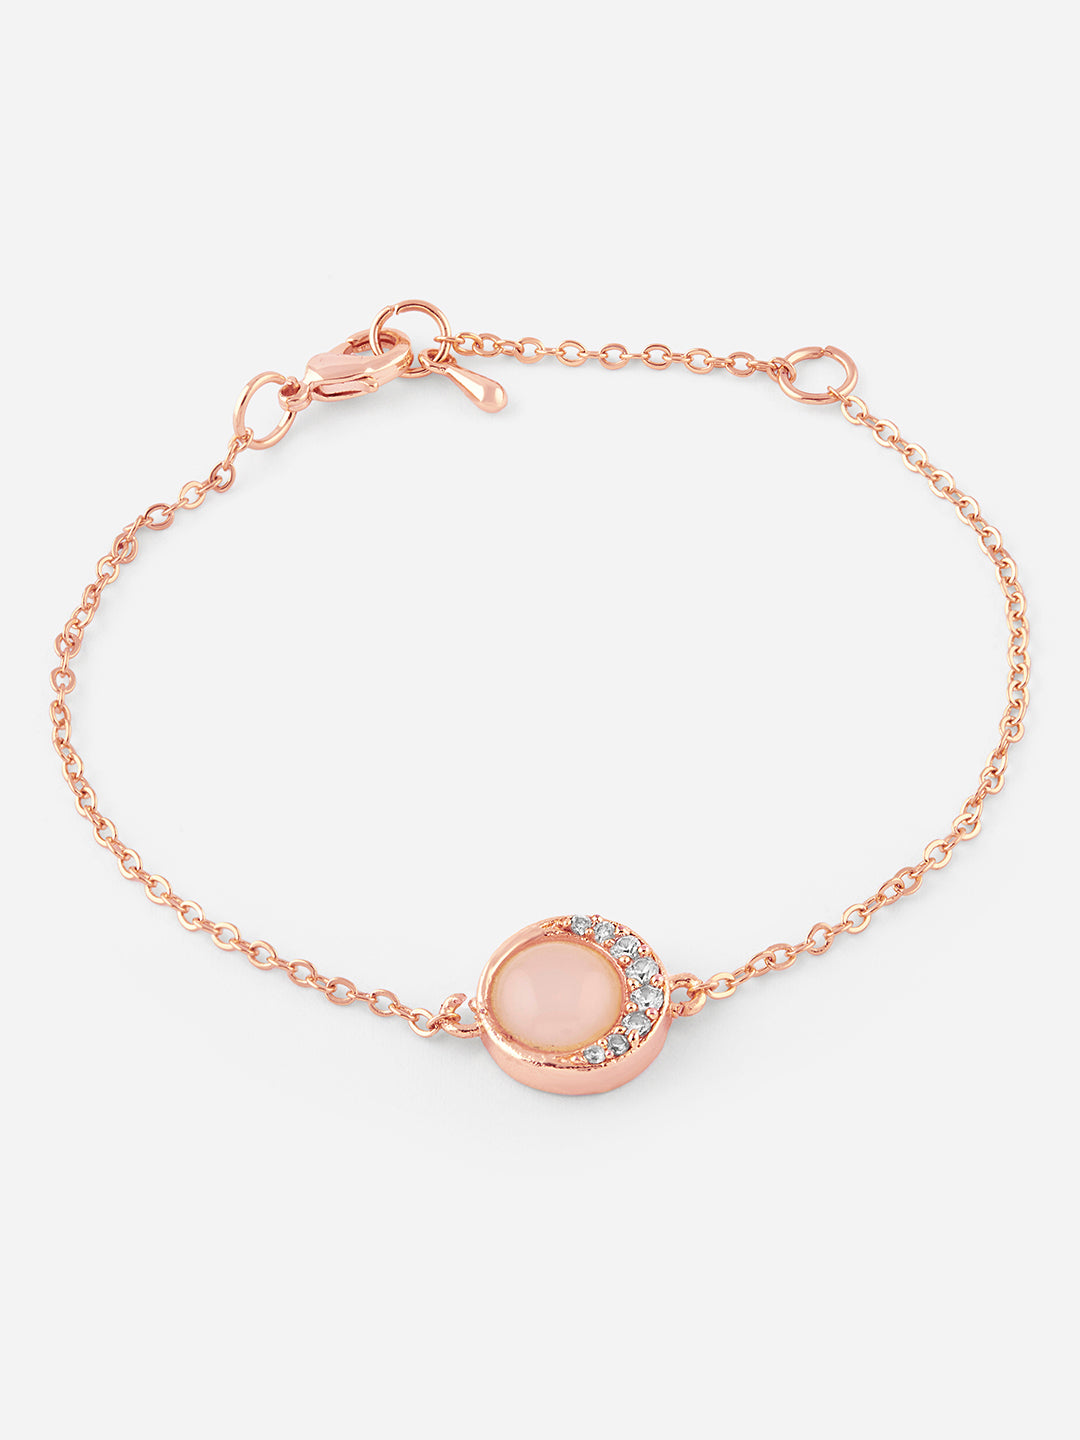 Womens White Gold Plated Pink Stone Moon Link Bracelet